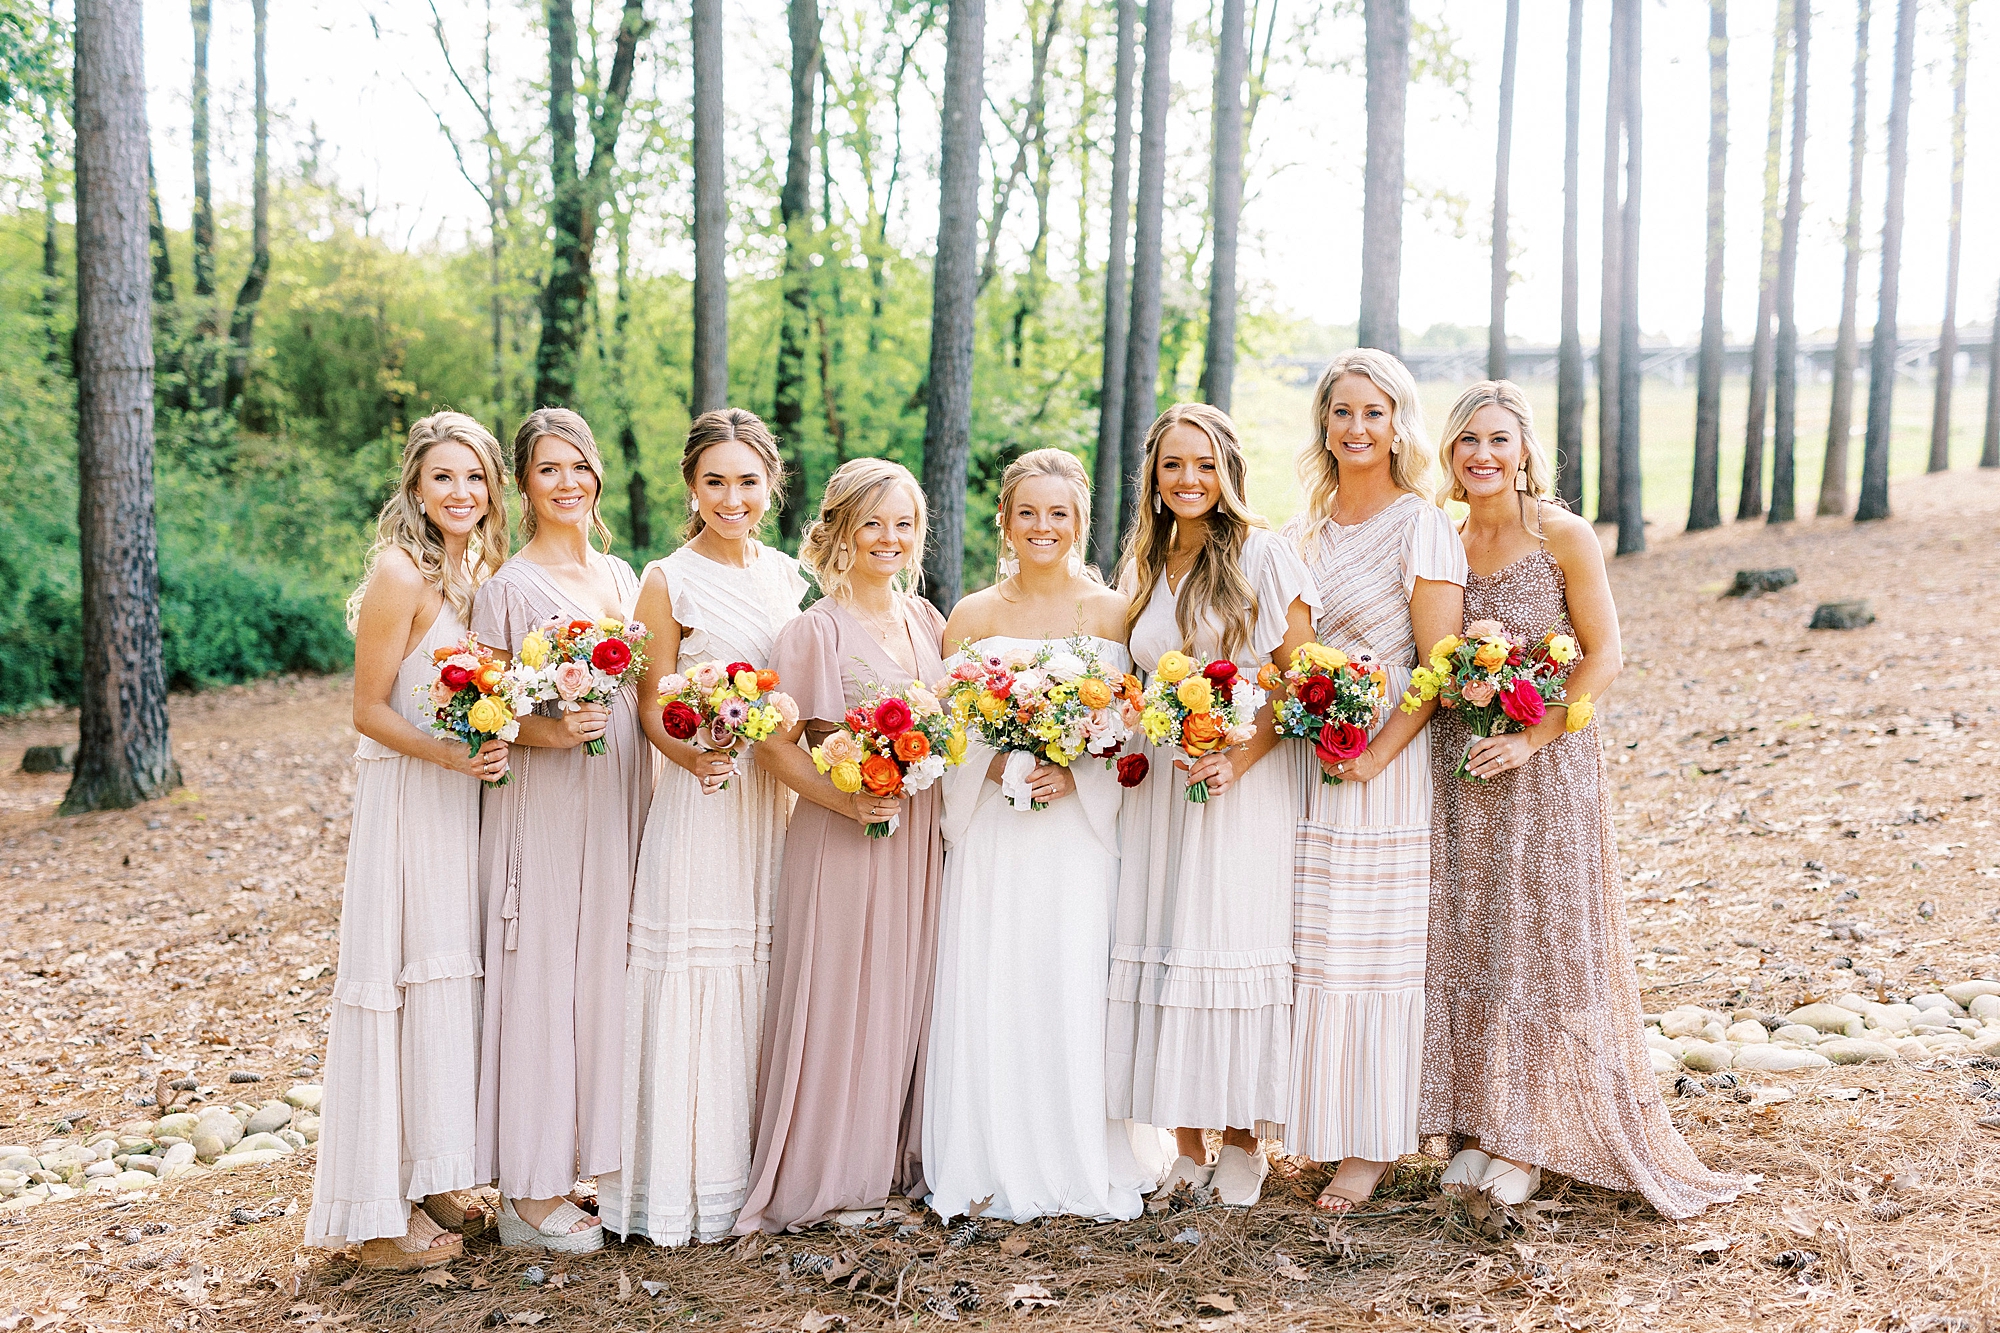 bride stands with bridesmaids in mismatched boho inspired bridesmaid gowns in pink